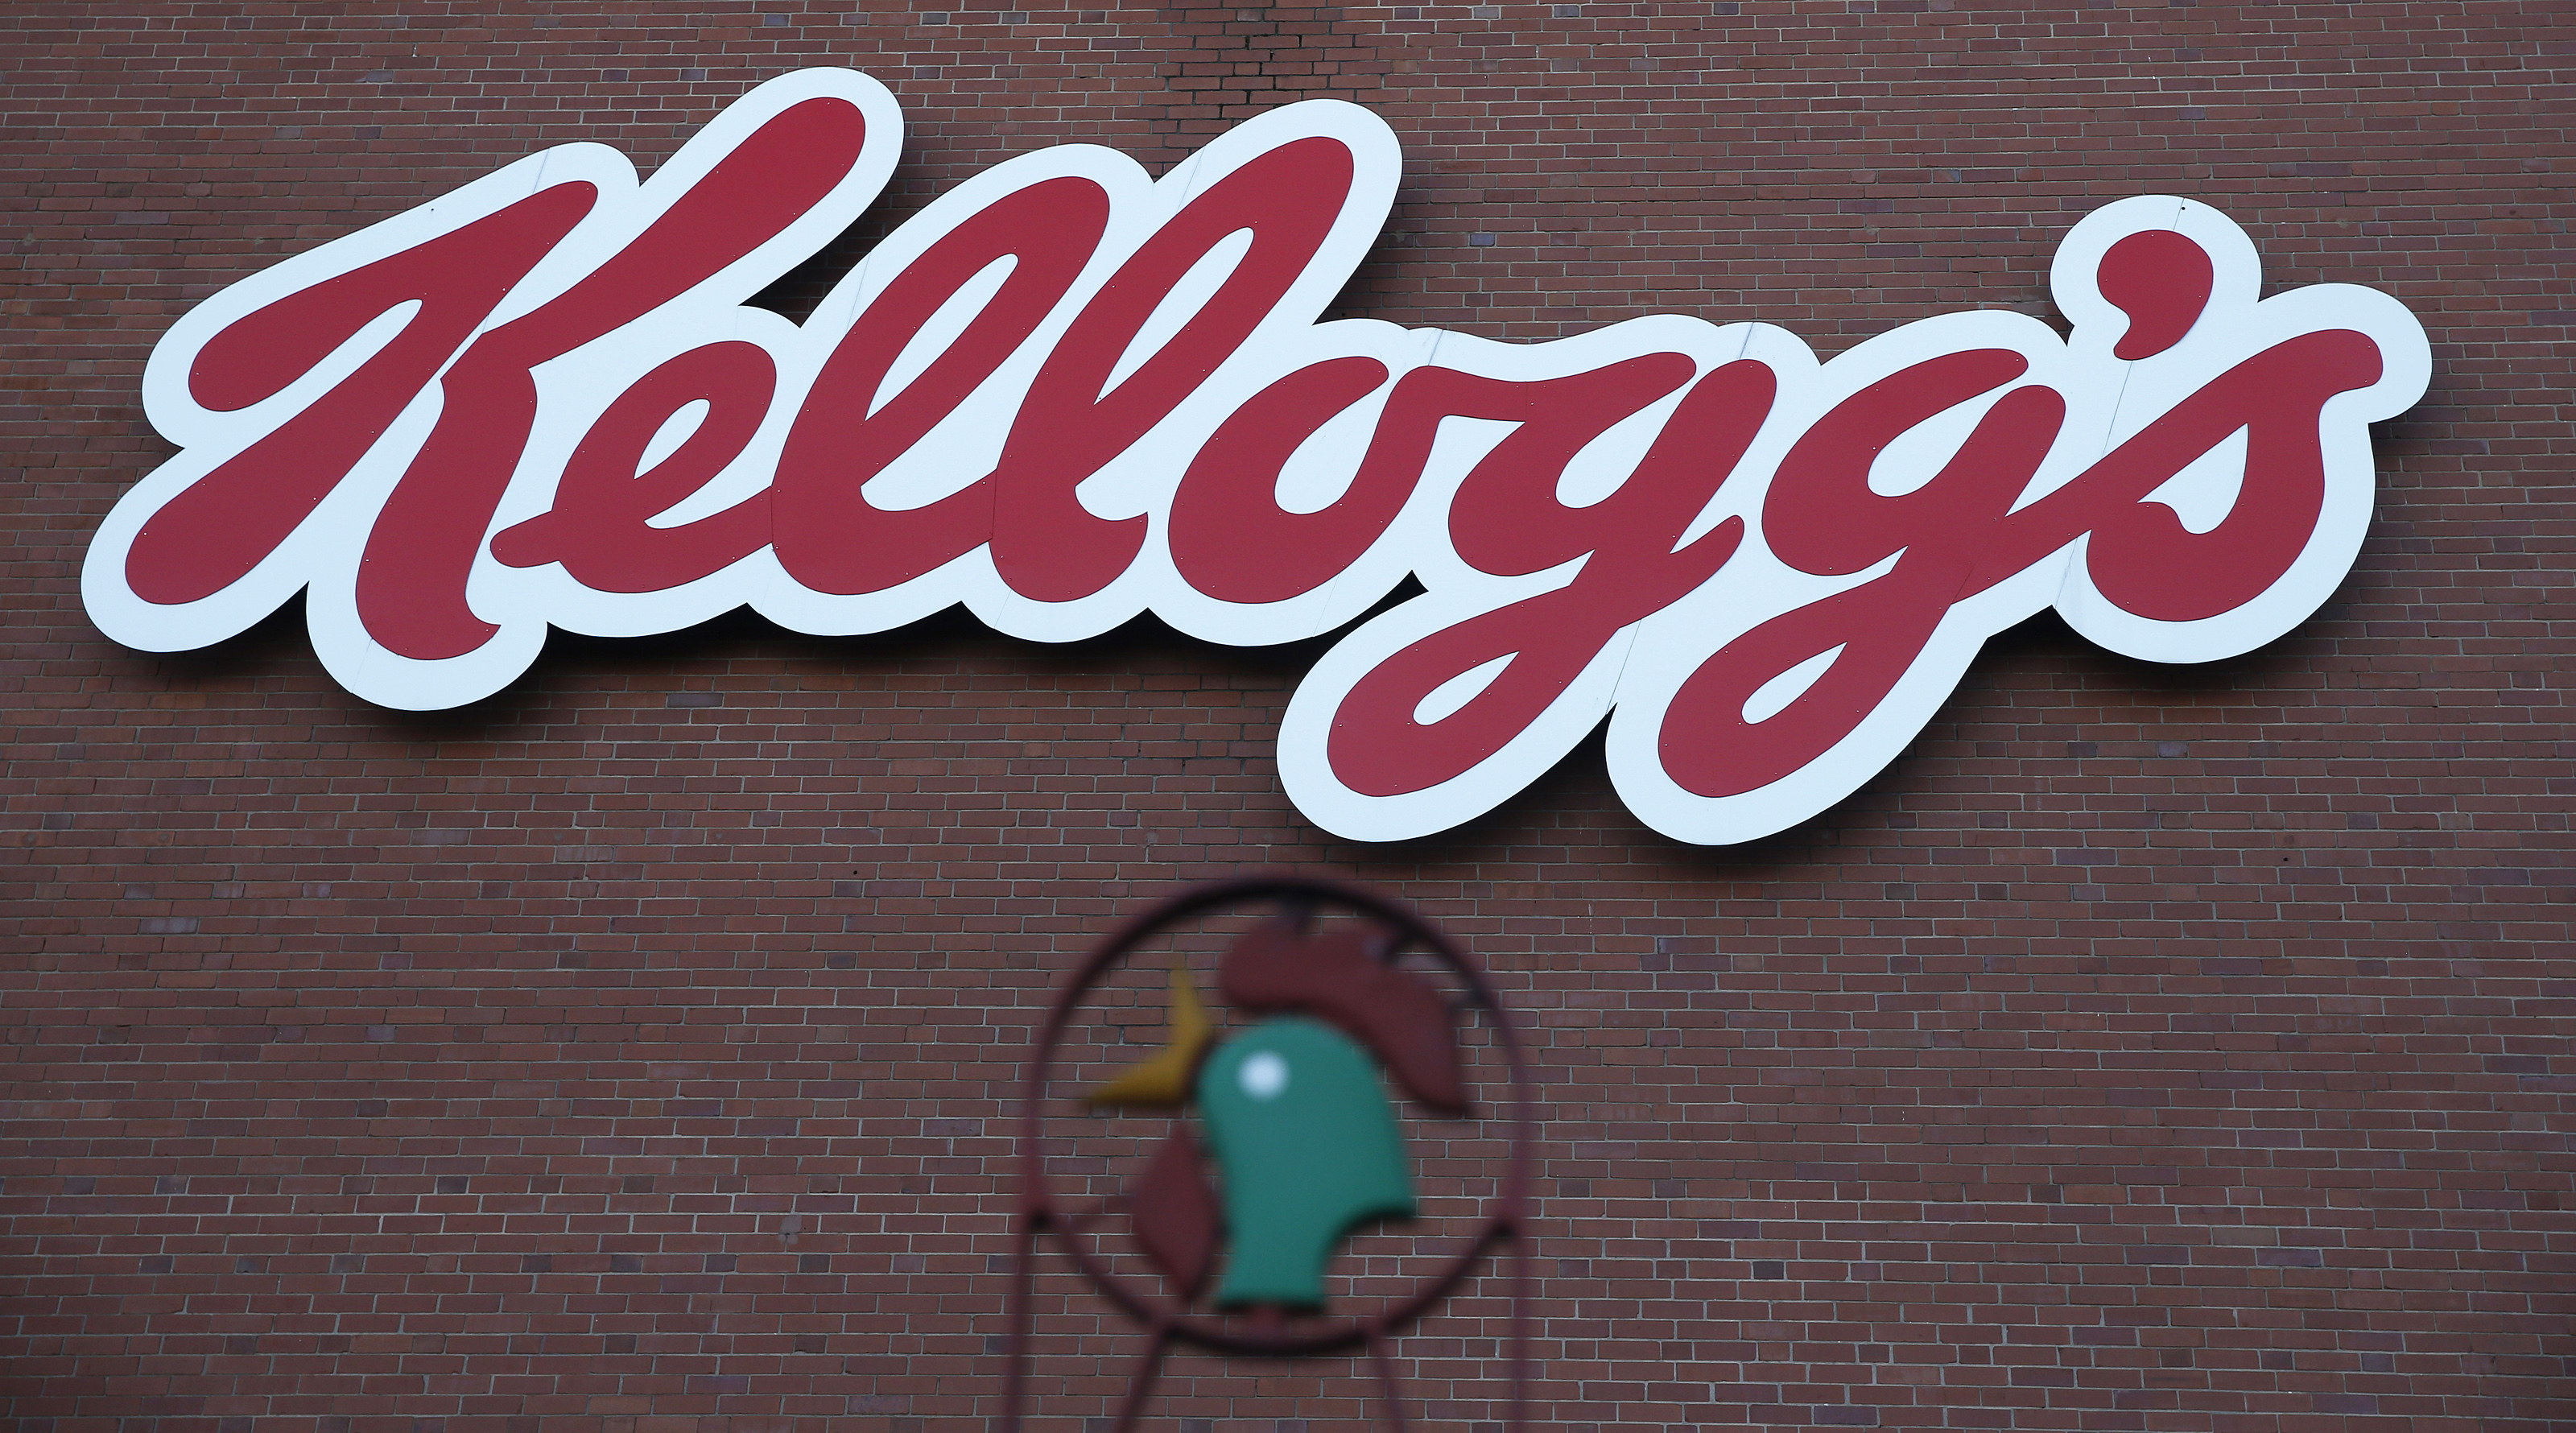 A sign hangs outside the Kellogg's factory near Manchester